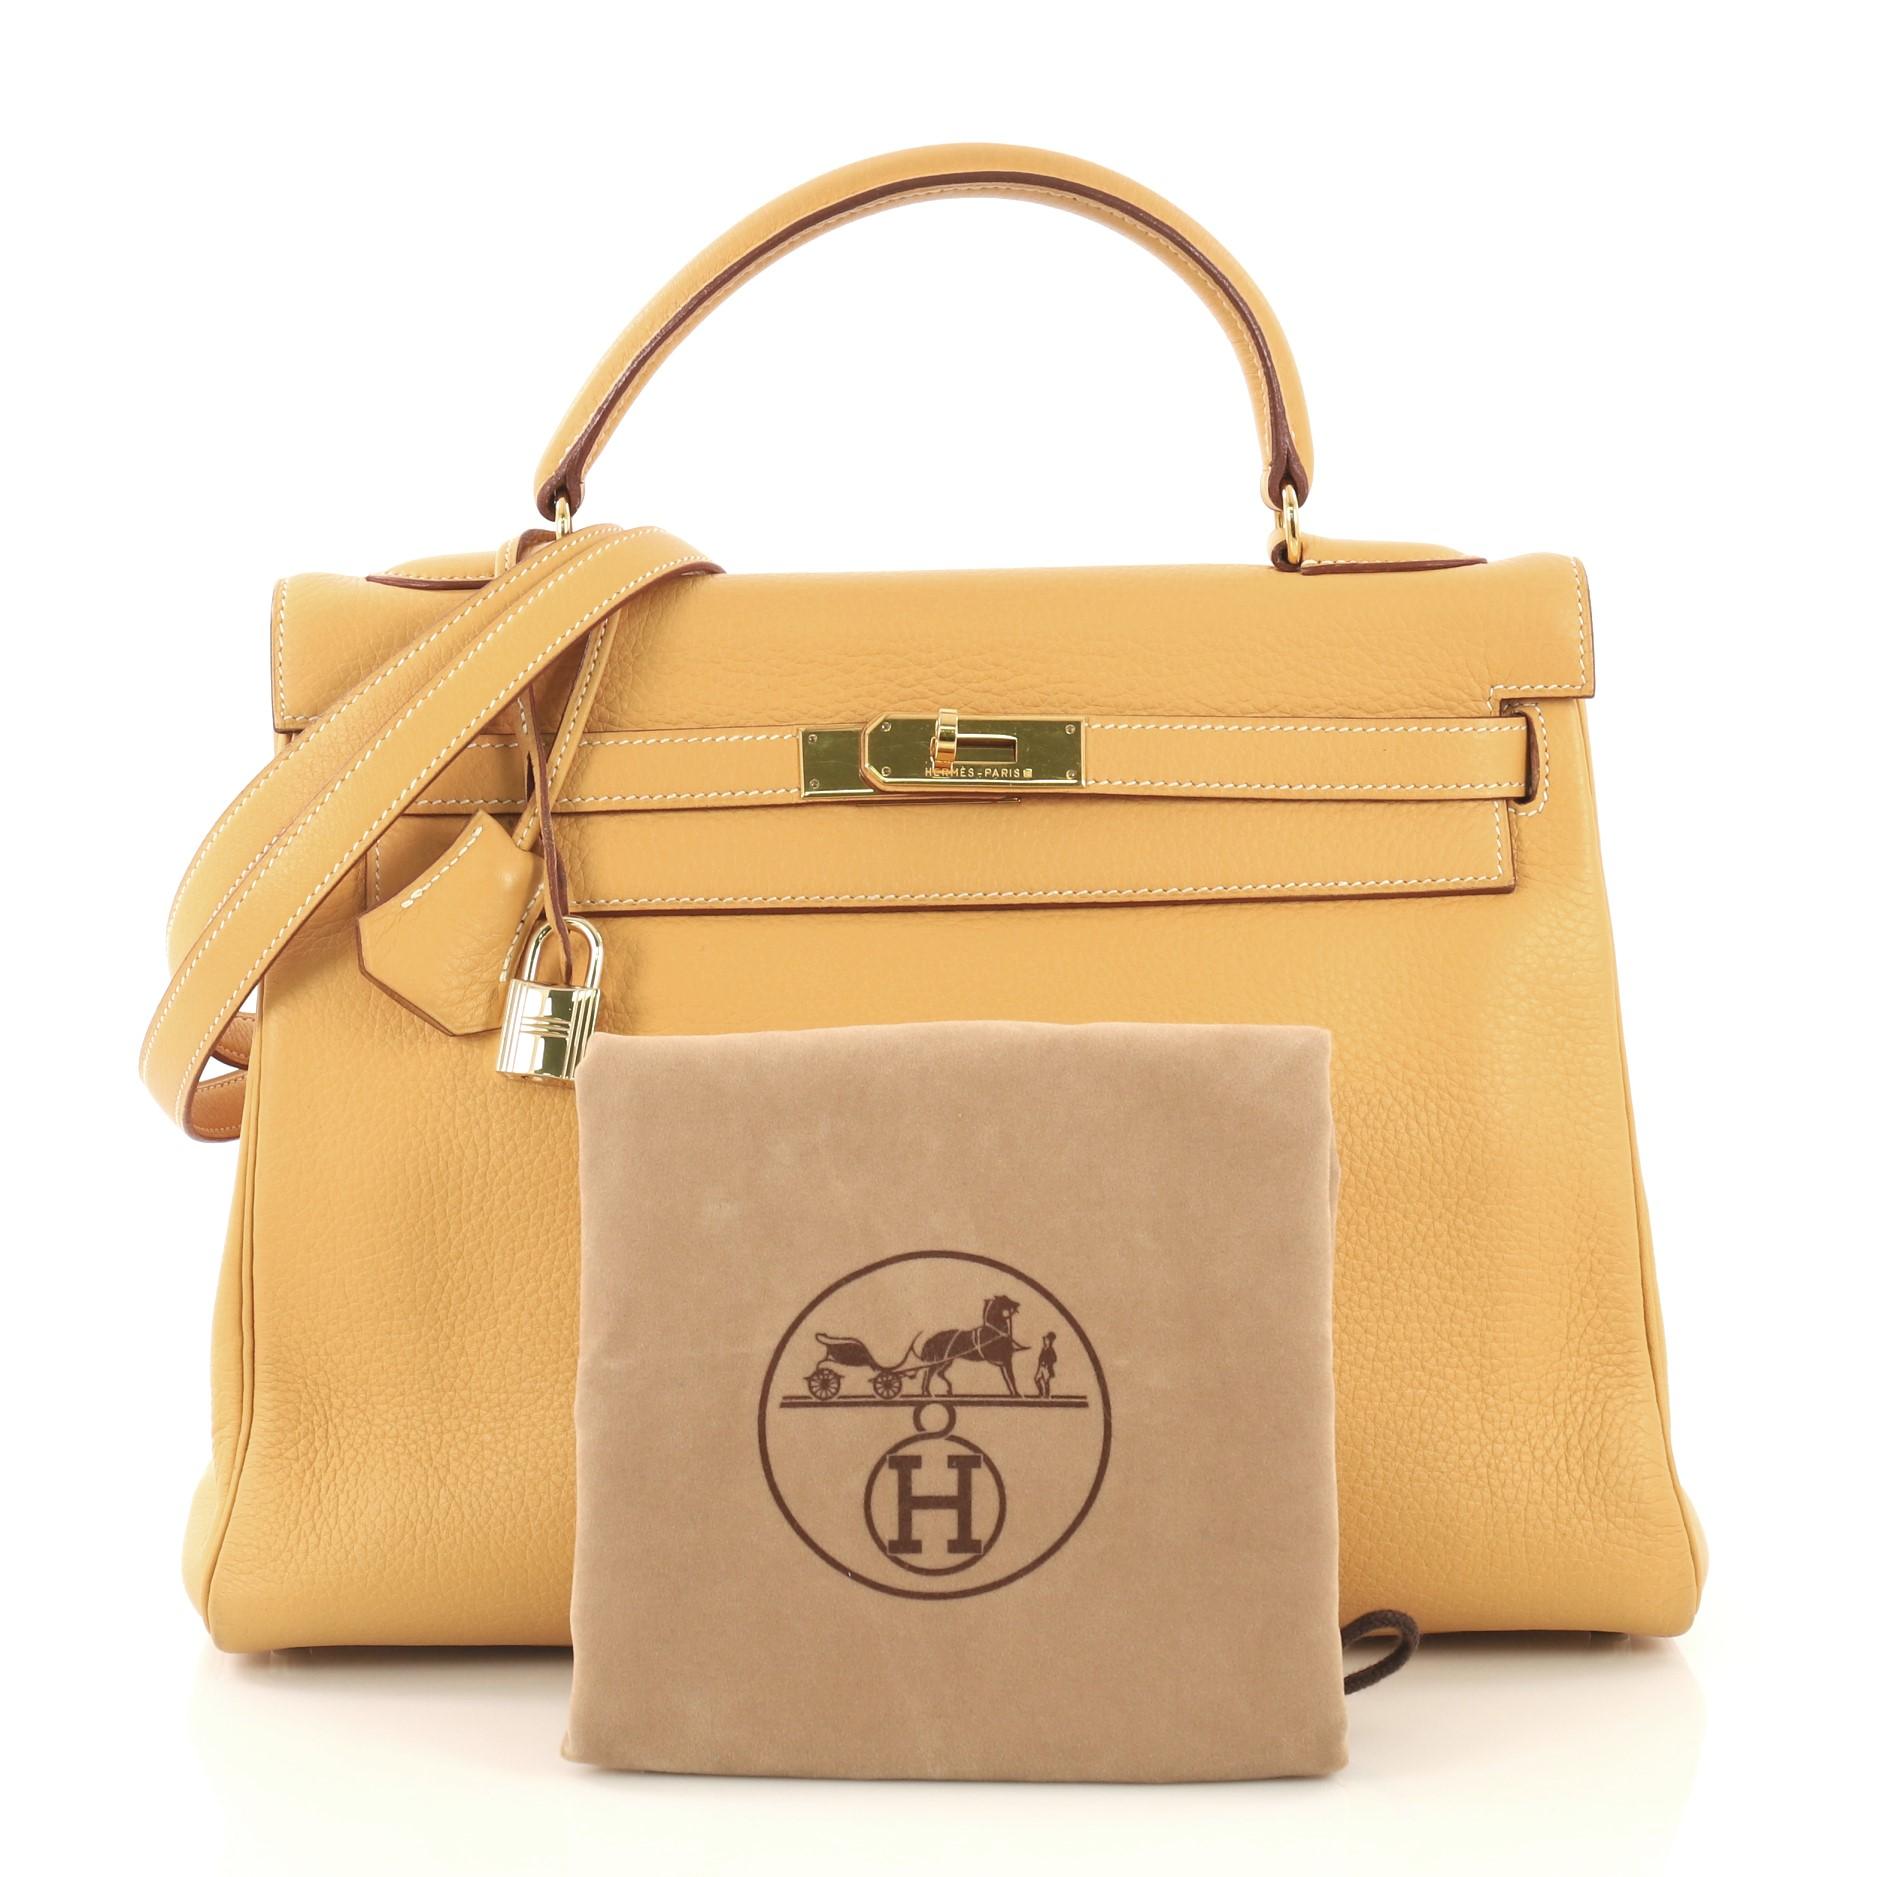 This Hermes Kelly Handbag Natural Sable Clemence with Gold Hardware 32, crafted in Natural Sable yellow Clemence leather, features a single rolled top handle, frontal flap, and gold hardware. Its turn-lock closure opens to a Natural Sable yellow